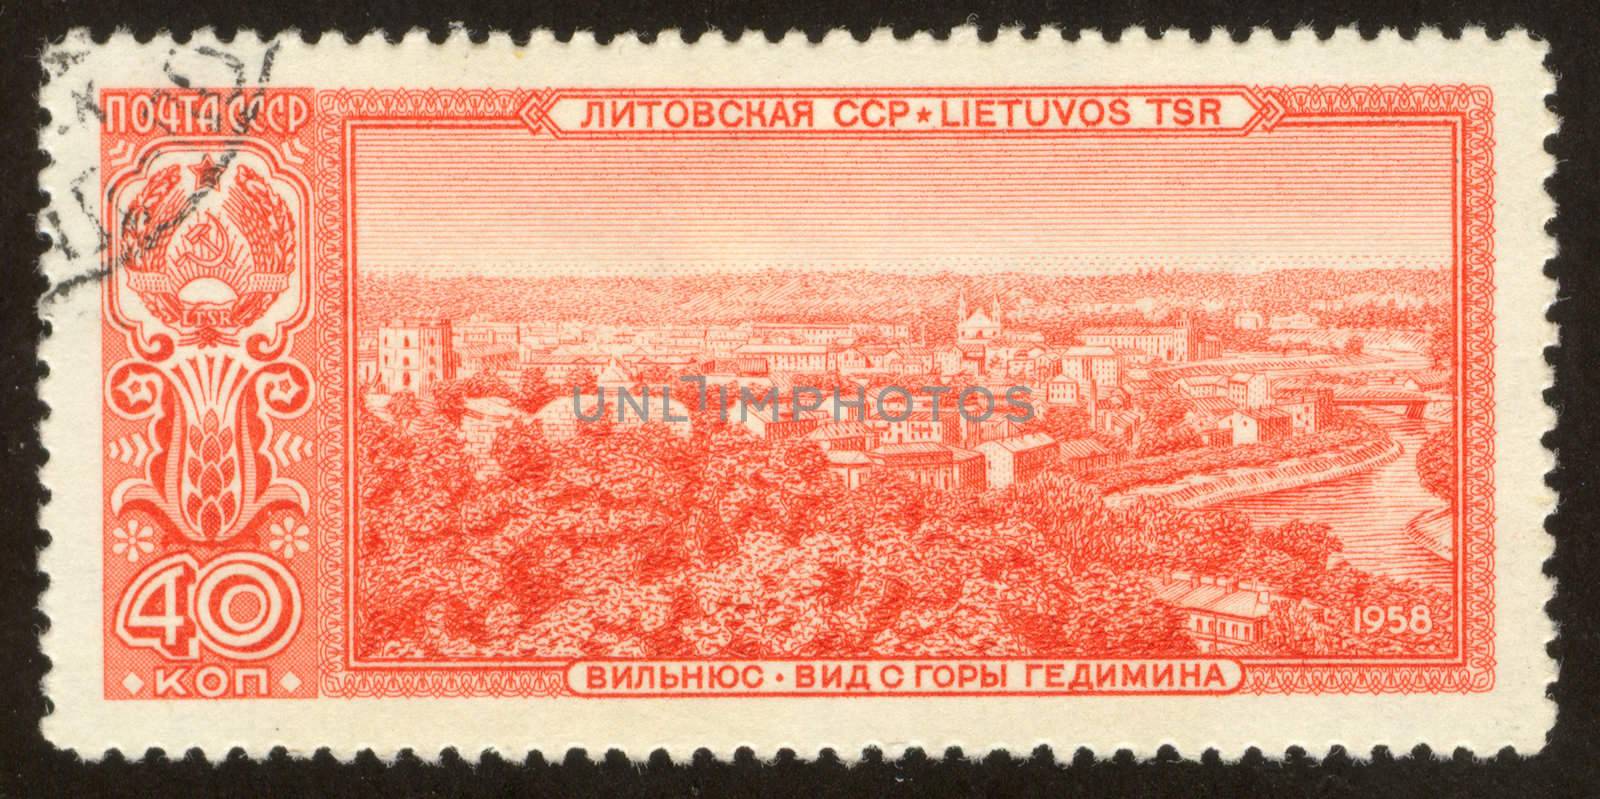 The scanned stamp. The Soviet stamp. The city of Vilnius, capital of Lithuania.